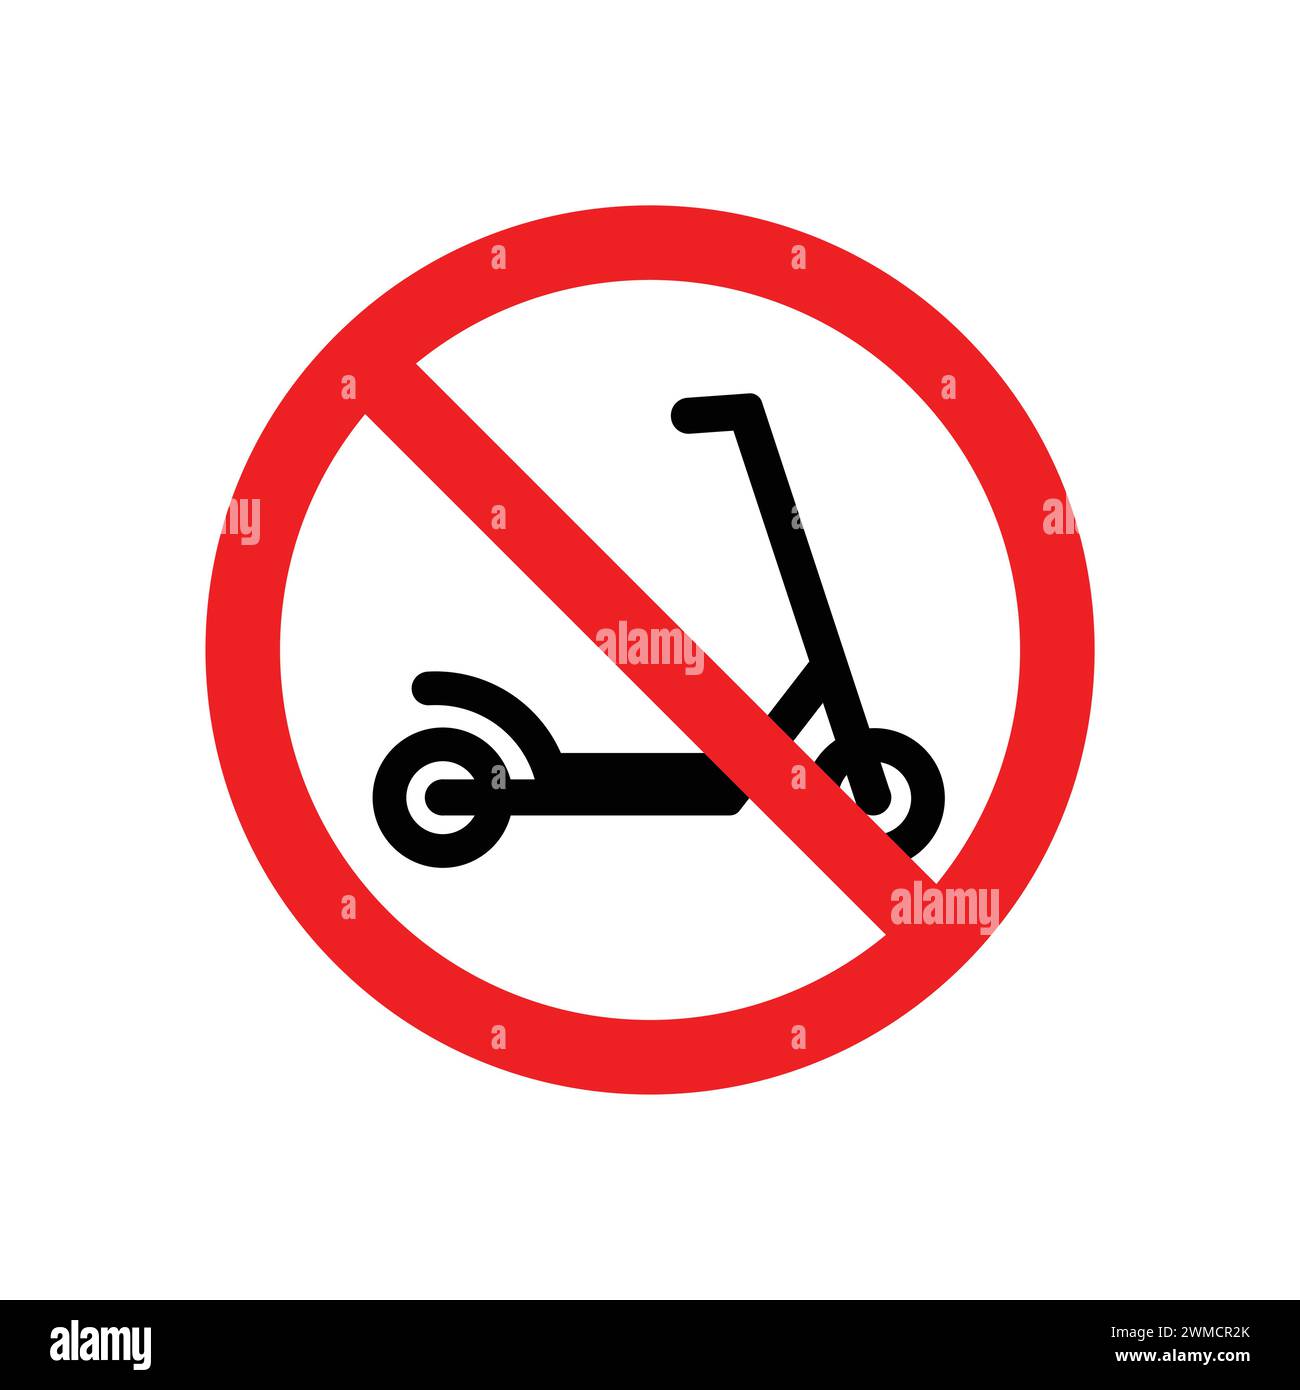 No Scooter Icon. No Kick Scooter Sign. No Scooter Or E-Bike Riding On Sidewalk. The Red Circle Prohibiting Sign. Access Forbidden. Prohibition Symbol Stock Vector